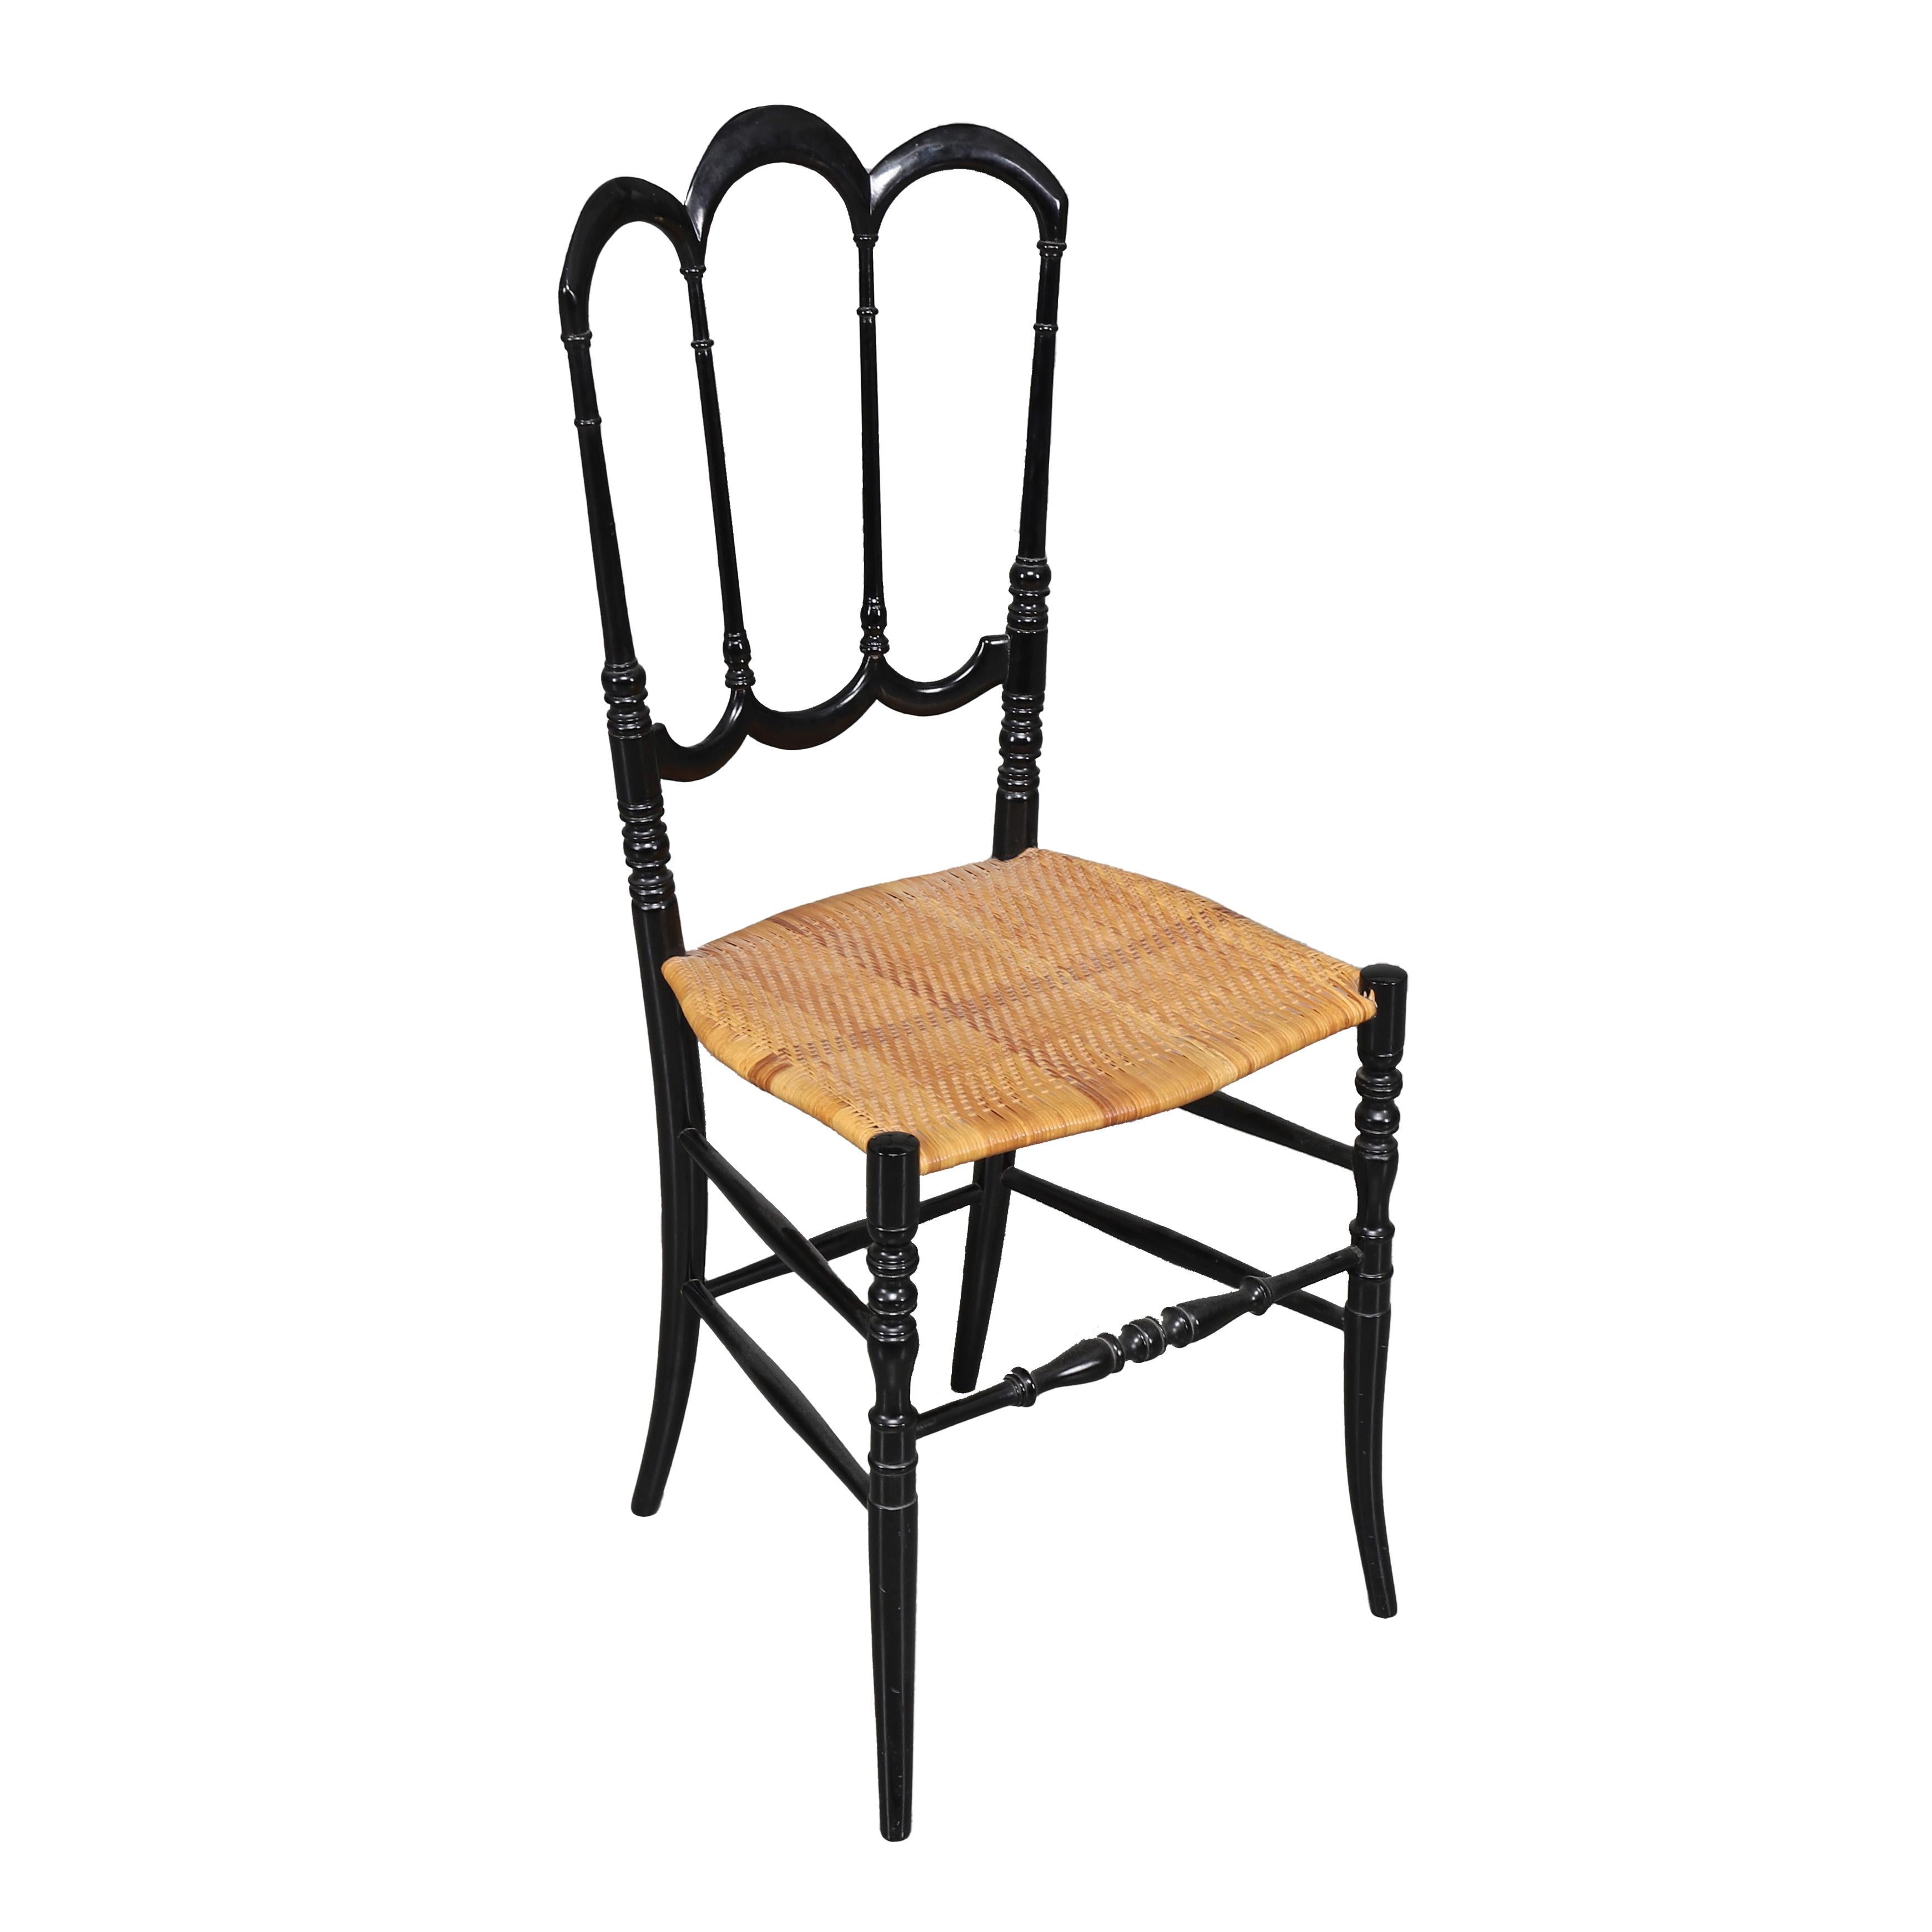 Offered for your consideration is a solitary black lacquered Chiavari chair in beautiful vintage condition. Featuring turned legs and hand carved purple willow frame and backrest in a restrained 17th century Empire style and painted in a black